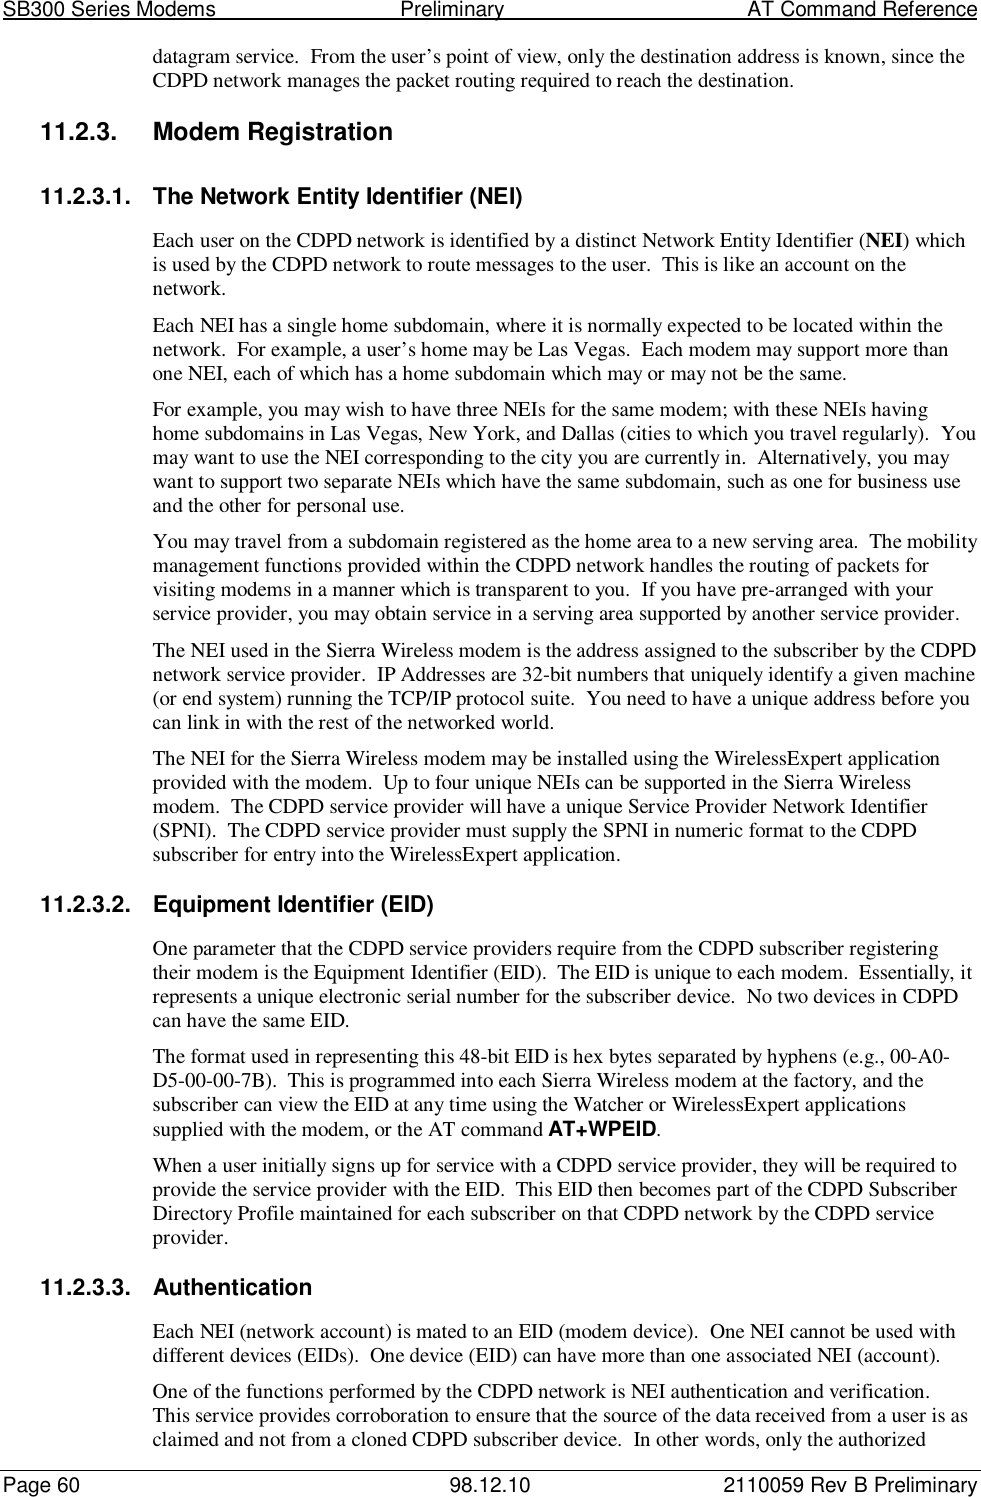 SB300 Series Modems                                  Preliminary                                         AT Command ReferencePage 60 98.12.10 2110059 Rev B Preliminarydatagram service.  From the user’s point of view, only the destination address is known, since theCDPD network manages the packet routing required to reach the destination.11.2.3. Modem Registration11.2.3.1.  The Network Entity Identifier (NEI)Each user on the CDPD network is identified by a distinct Network Entity Identifier (NEI) whichis used by the CDPD network to route messages to the user.  This is like an account on thenetwork.Each NEI has a single home subdomain, where it is normally expected to be located within thenetwork.  For example, a user’s home may be Las Vegas.  Each modem may support more thanone NEI, each of which has a home subdomain which may or may not be the same.For example, you may wish to have three NEIs for the same modem; with these NEIs havinghome subdomains in Las Vegas, New York, and Dallas (cities to which you travel regularly).  Youmay want to use the NEI corresponding to the city you are currently in.  Alternatively, you maywant to support two separate NEIs which have the same subdomain, such as one for business useand the other for personal use.You may travel from a subdomain registered as the home area to a new serving area.  The mobilitymanagement functions provided within the CDPD network handles the routing of packets forvisiting modems in a manner which is transparent to you.  If you have pre-arranged with yourservice provider, you may obtain service in a serving area supported by another service provider.The NEI used in the Sierra Wireless modem is the address assigned to the subscriber by the CDPDnetwork service provider.  IP Addresses are 32-bit numbers that uniquely identify a given machine(or end system) running the TCP/IP protocol suite.  You need to have a unique address before youcan link in with the rest of the networked world.The NEI for the Sierra Wireless modem may be installed using the WirelessExpert applicationprovided with the modem.  Up to four unique NEIs can be supported in the Sierra Wirelessmodem.  The CDPD service provider will have a unique Service Provider Network Identifier(SPNI).  The CDPD service provider must supply the SPNI in numeric format to the CDPDsubscriber for entry into the WirelessExpert application.11.2.3.2.  Equipment Identifier (EID)One parameter that the CDPD service providers require from the CDPD subscriber registeringtheir modem is the Equipment Identifier (EID).  The EID is unique to each modem.  Essentially, itrepresents a unique electronic serial number for the subscriber device.  No two devices in CDPDcan have the same EID.The format used in representing this 48-bit EID is hex bytes separated by hyphens (e.g., 00-A0-D5-00-00-7B).  This is programmed into each Sierra Wireless modem at the factory, and thesubscriber can view the EID at any time using the Watcher or WirelessExpert applicationssupplied with the modem, or the AT command AT+WPEID.When a user initially signs up for service with a CDPD service provider, they will be required toprovide the service provider with the EID.  This EID then becomes part of the CDPD SubscriberDirectory Profile maintained for each subscriber on that CDPD network by the CDPD serviceprovider.11.2.3.3. AuthenticationEach NEI (network account) is mated to an EID (modem device).  One NEI cannot be used withdifferent devices (EIDs).  One device (EID) can have more than one associated NEI (account).One of the functions performed by the CDPD network is NEI authentication and verification.This service provides corroboration to ensure that the source of the data received from a user is asclaimed and not from a cloned CDPD subscriber device.  In other words, only the authorized